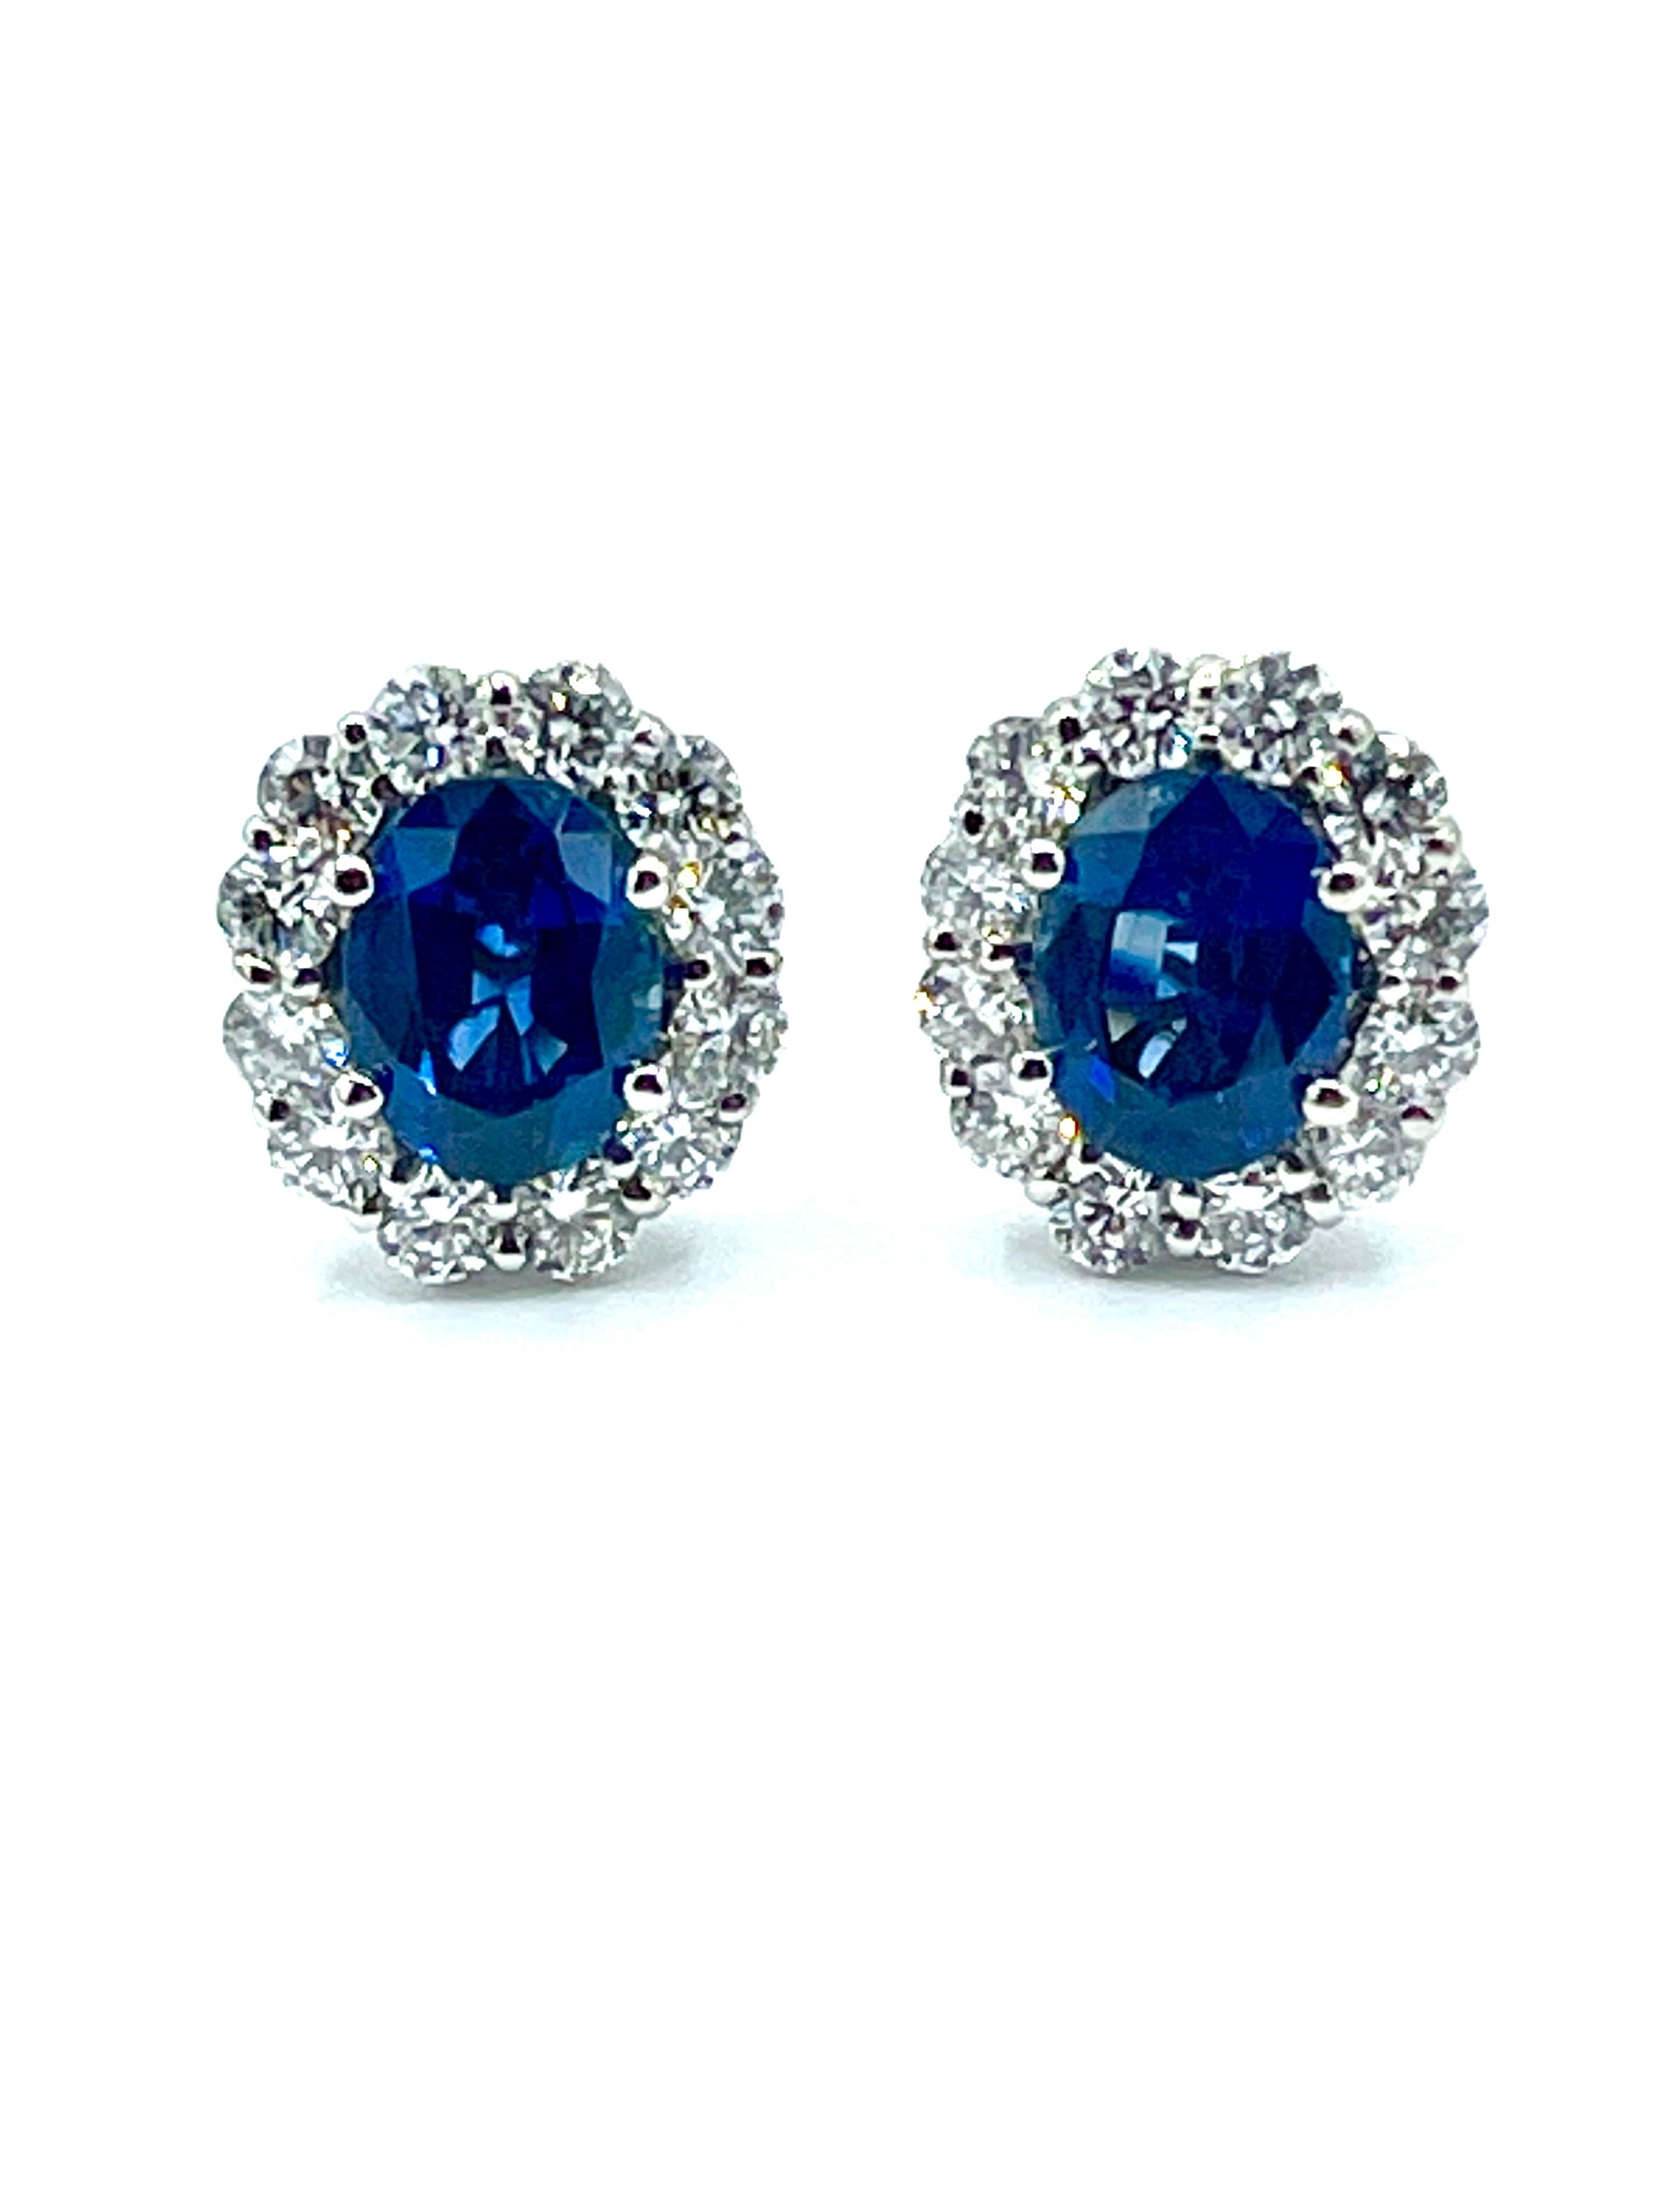 Modern 3.16 Carat Oval Sapphires and Round Brilliant Diamond White Gold Stud Earrings For Sale